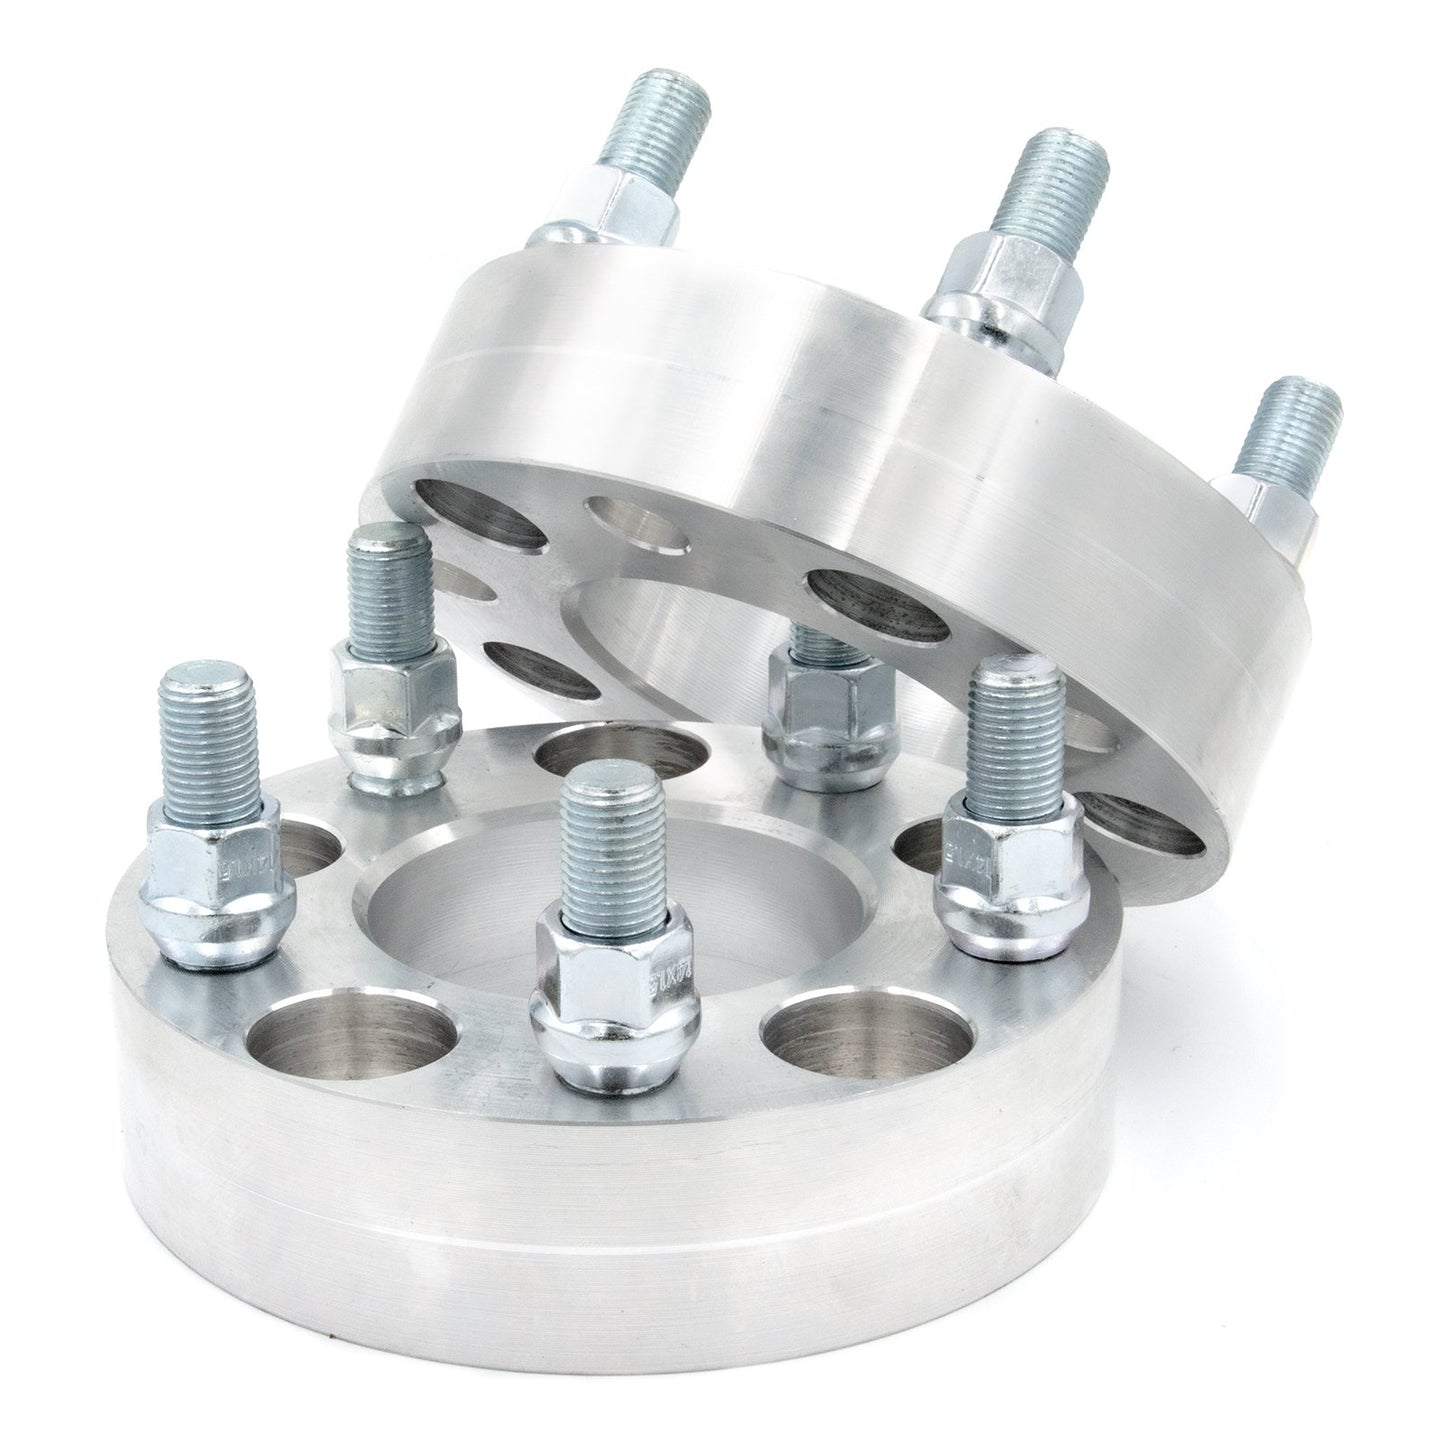 5x120 to 5x105 Wheel Spacer/Adapter - Thickness: 3/4"- 4"